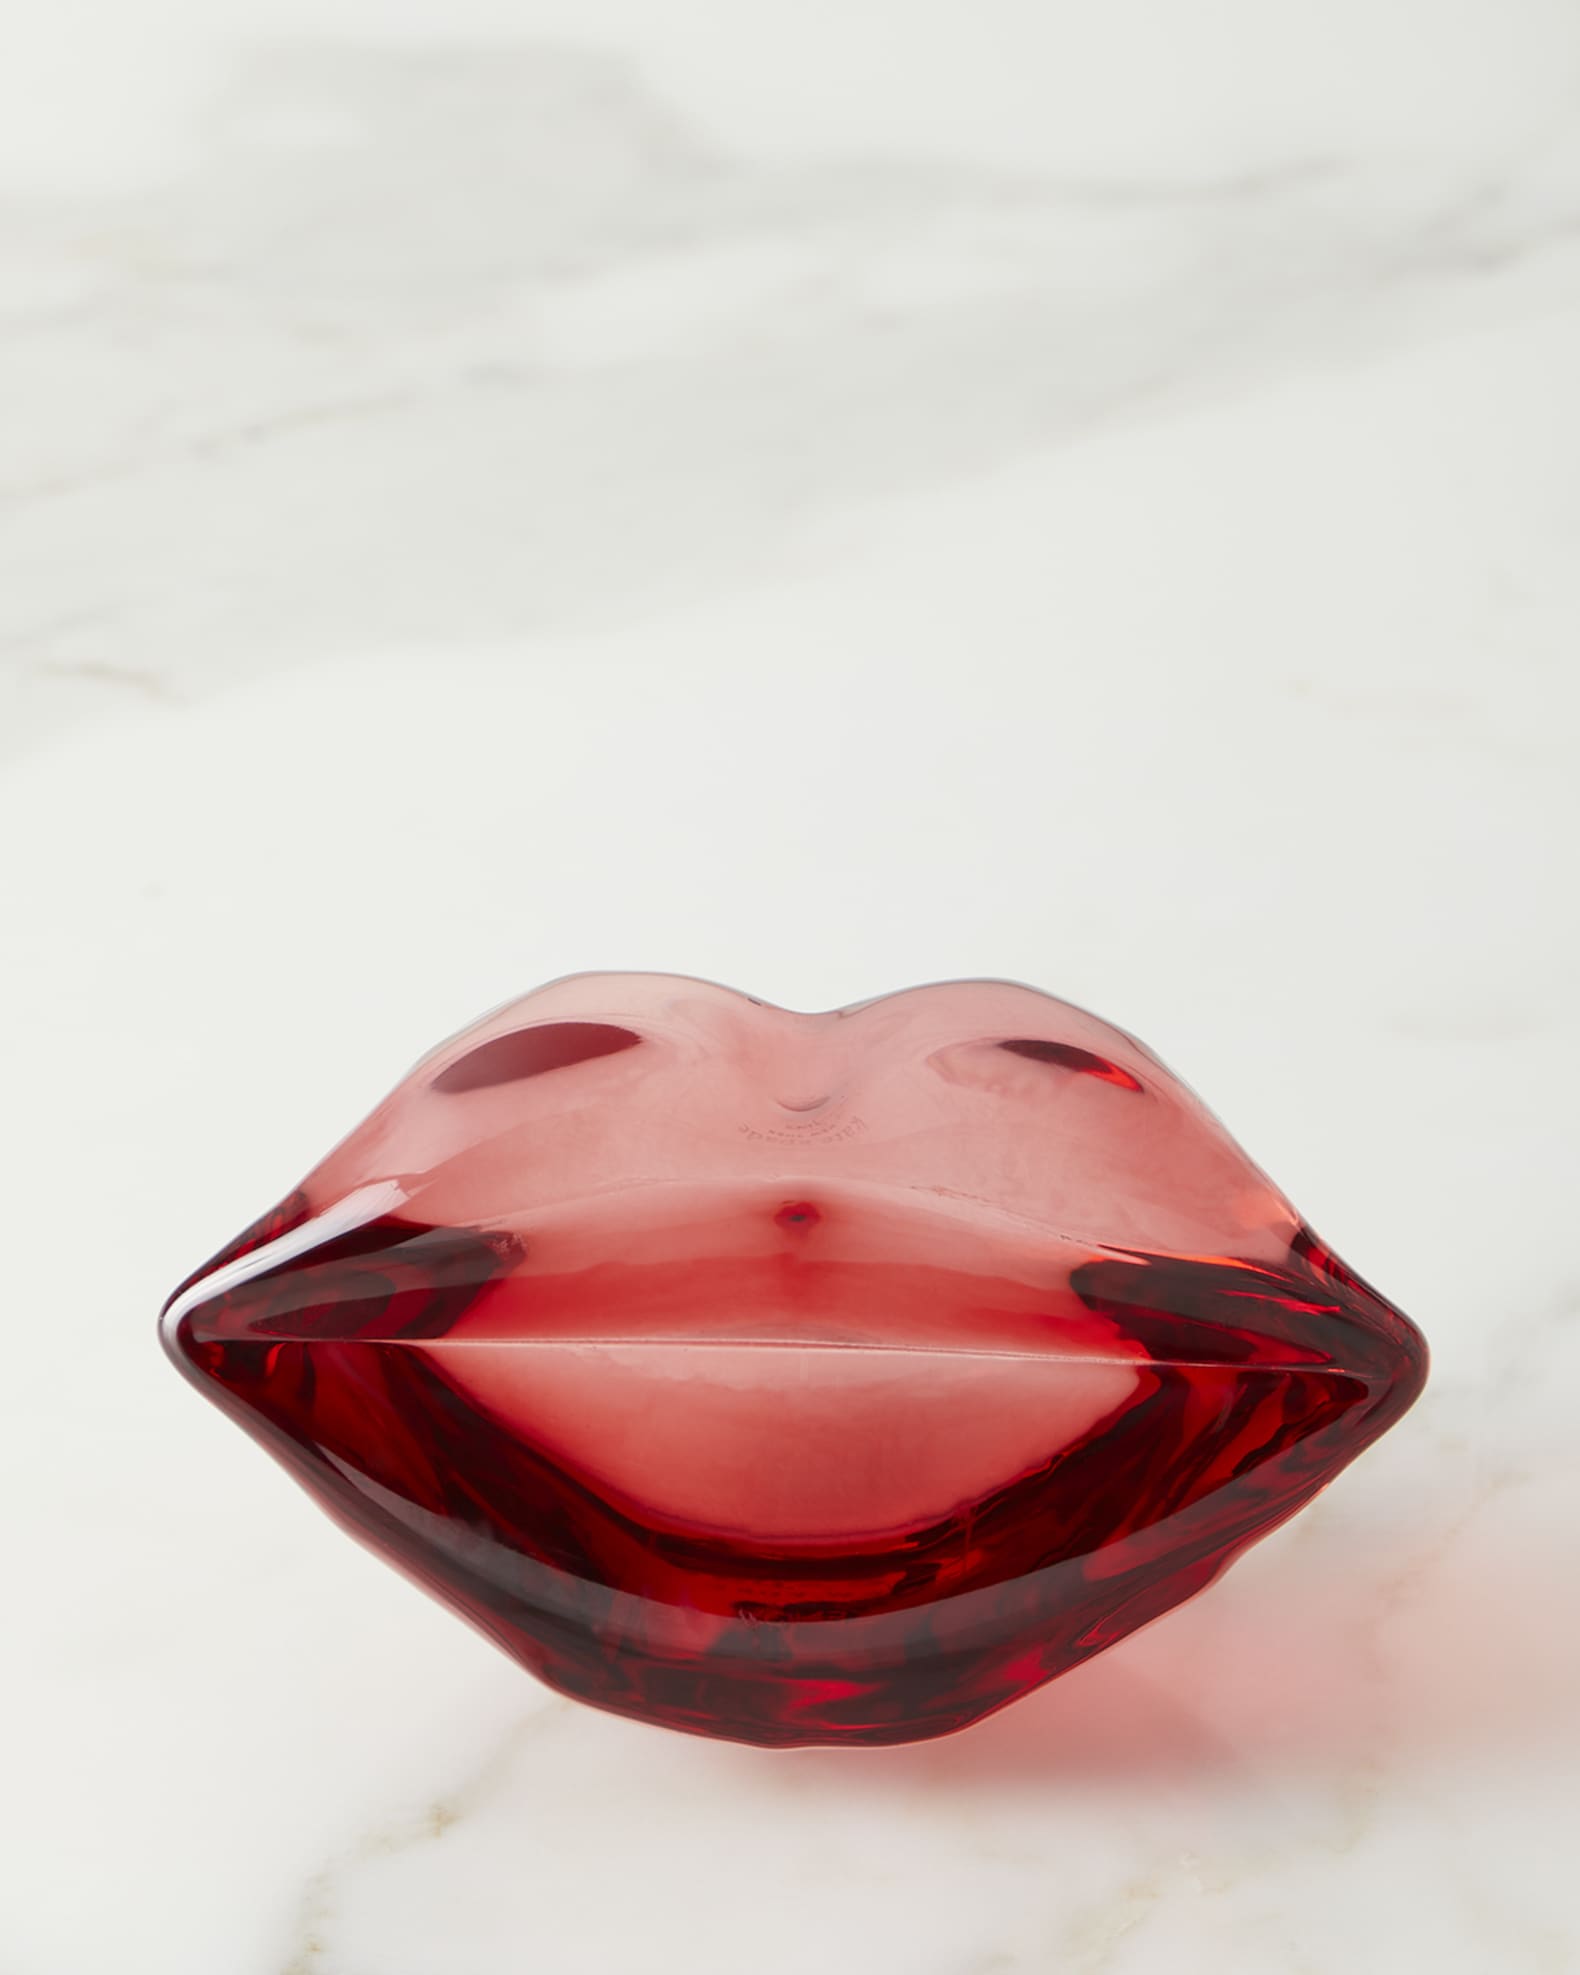 kate spade new york Lips Paperweight